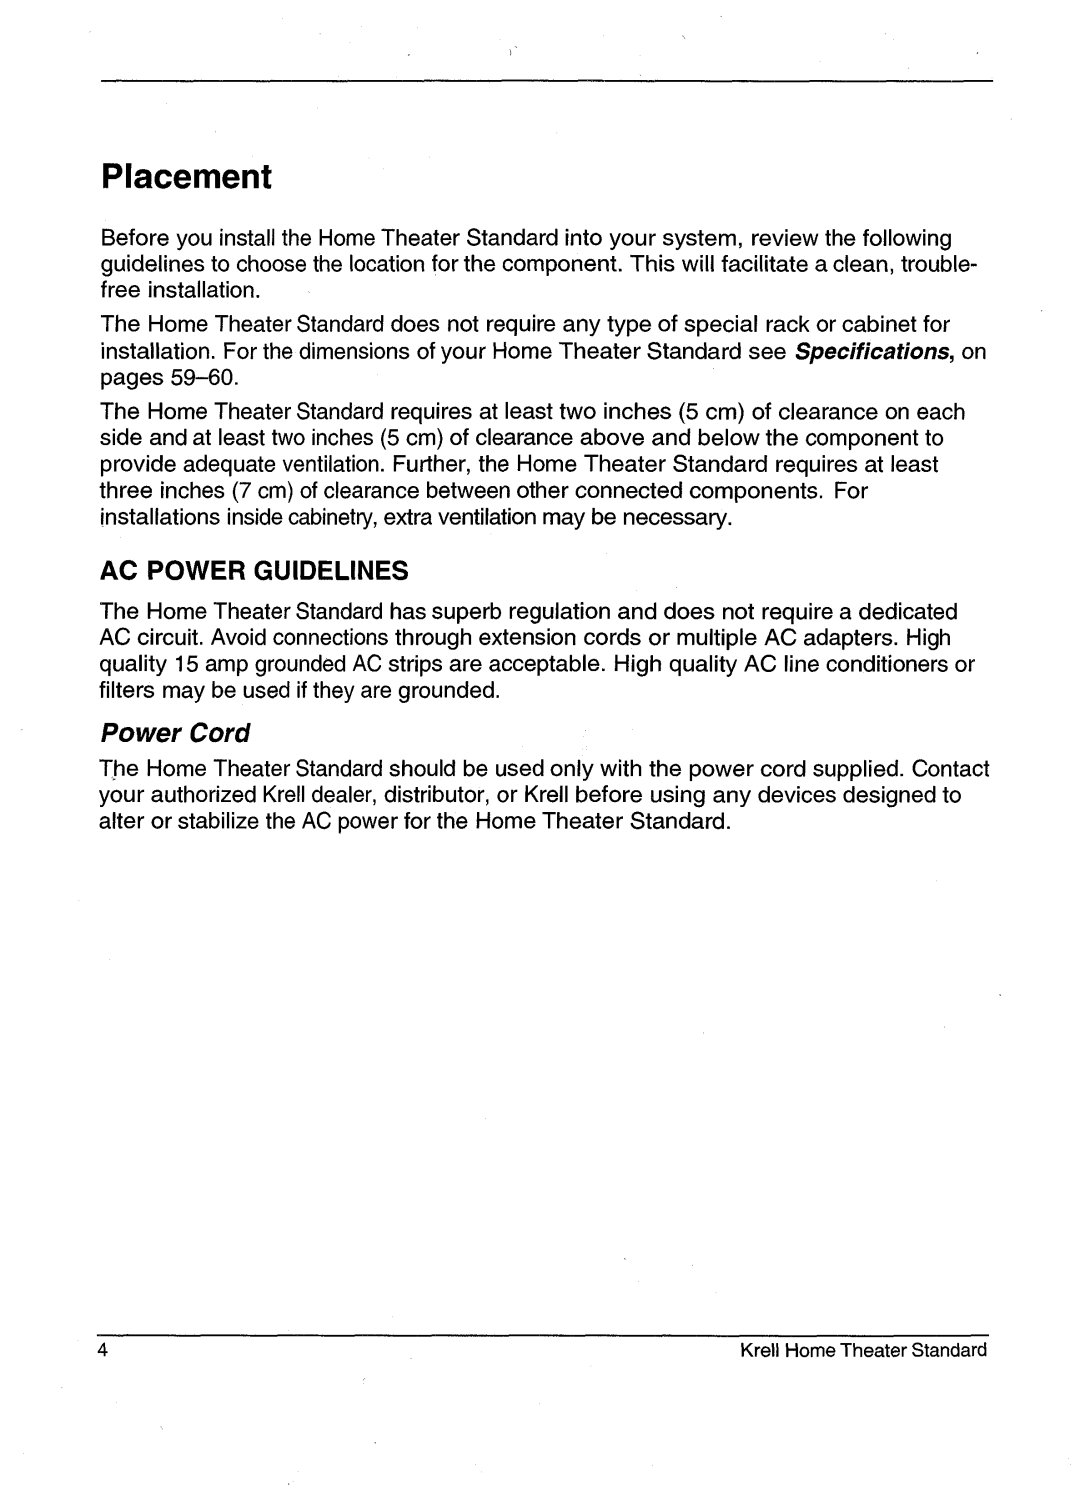 Krell Industries HTS 2 manual Placement, Power Cord, Ac Power Guidelines 